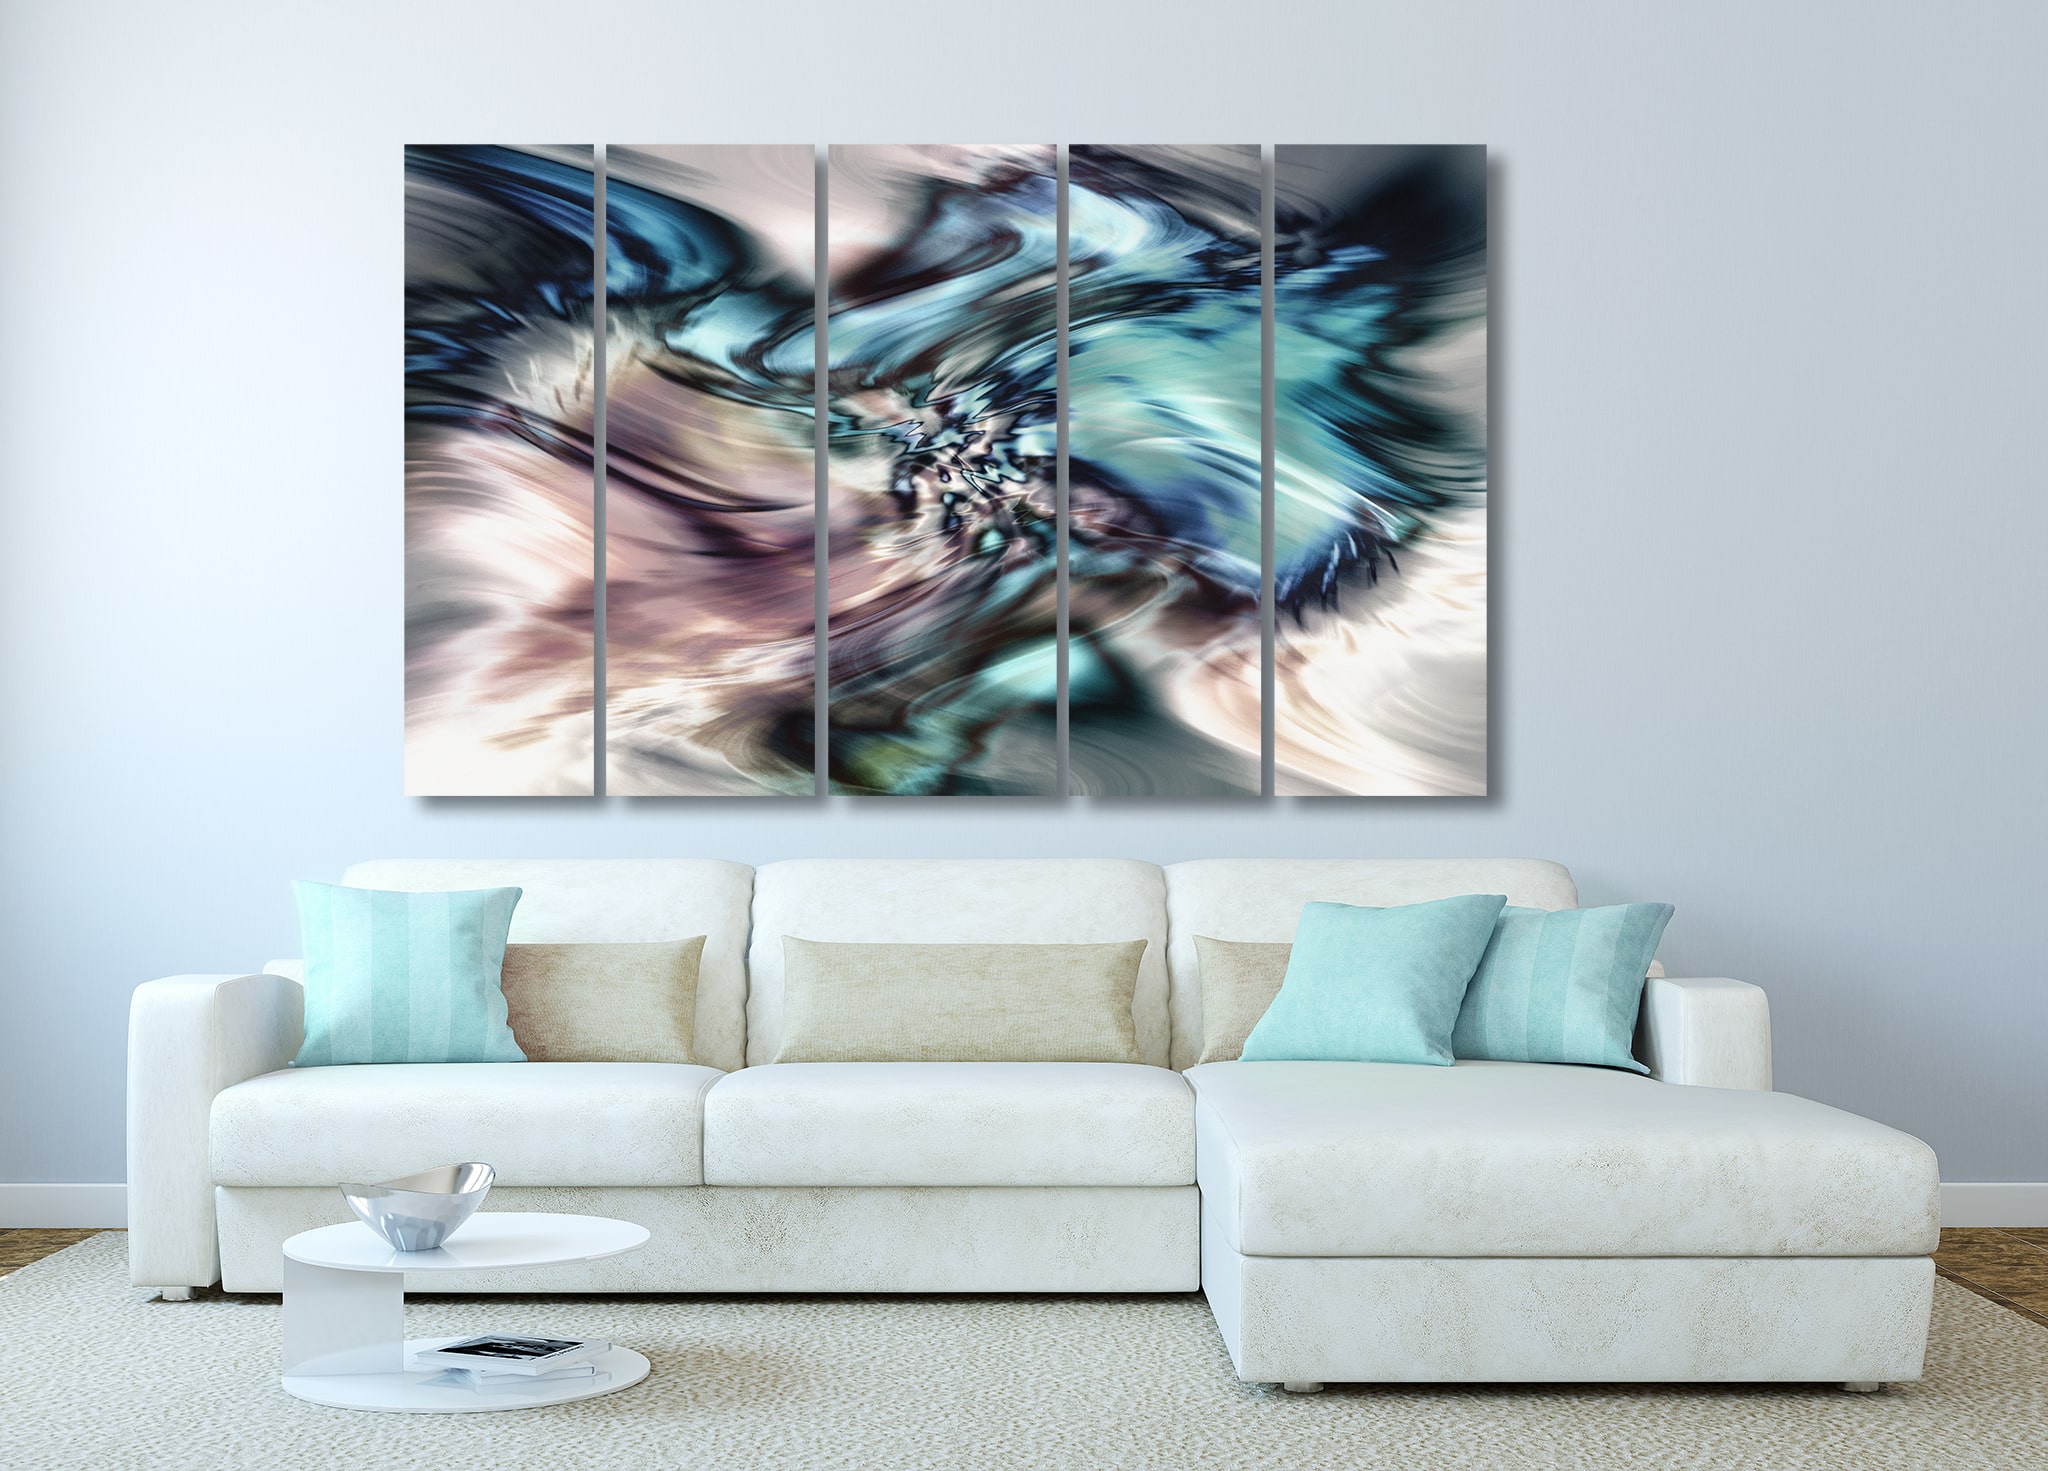 Details about   Abstract Wall Art Urban Decor Modern Color Layers Artwork on Metal or Acrylic 